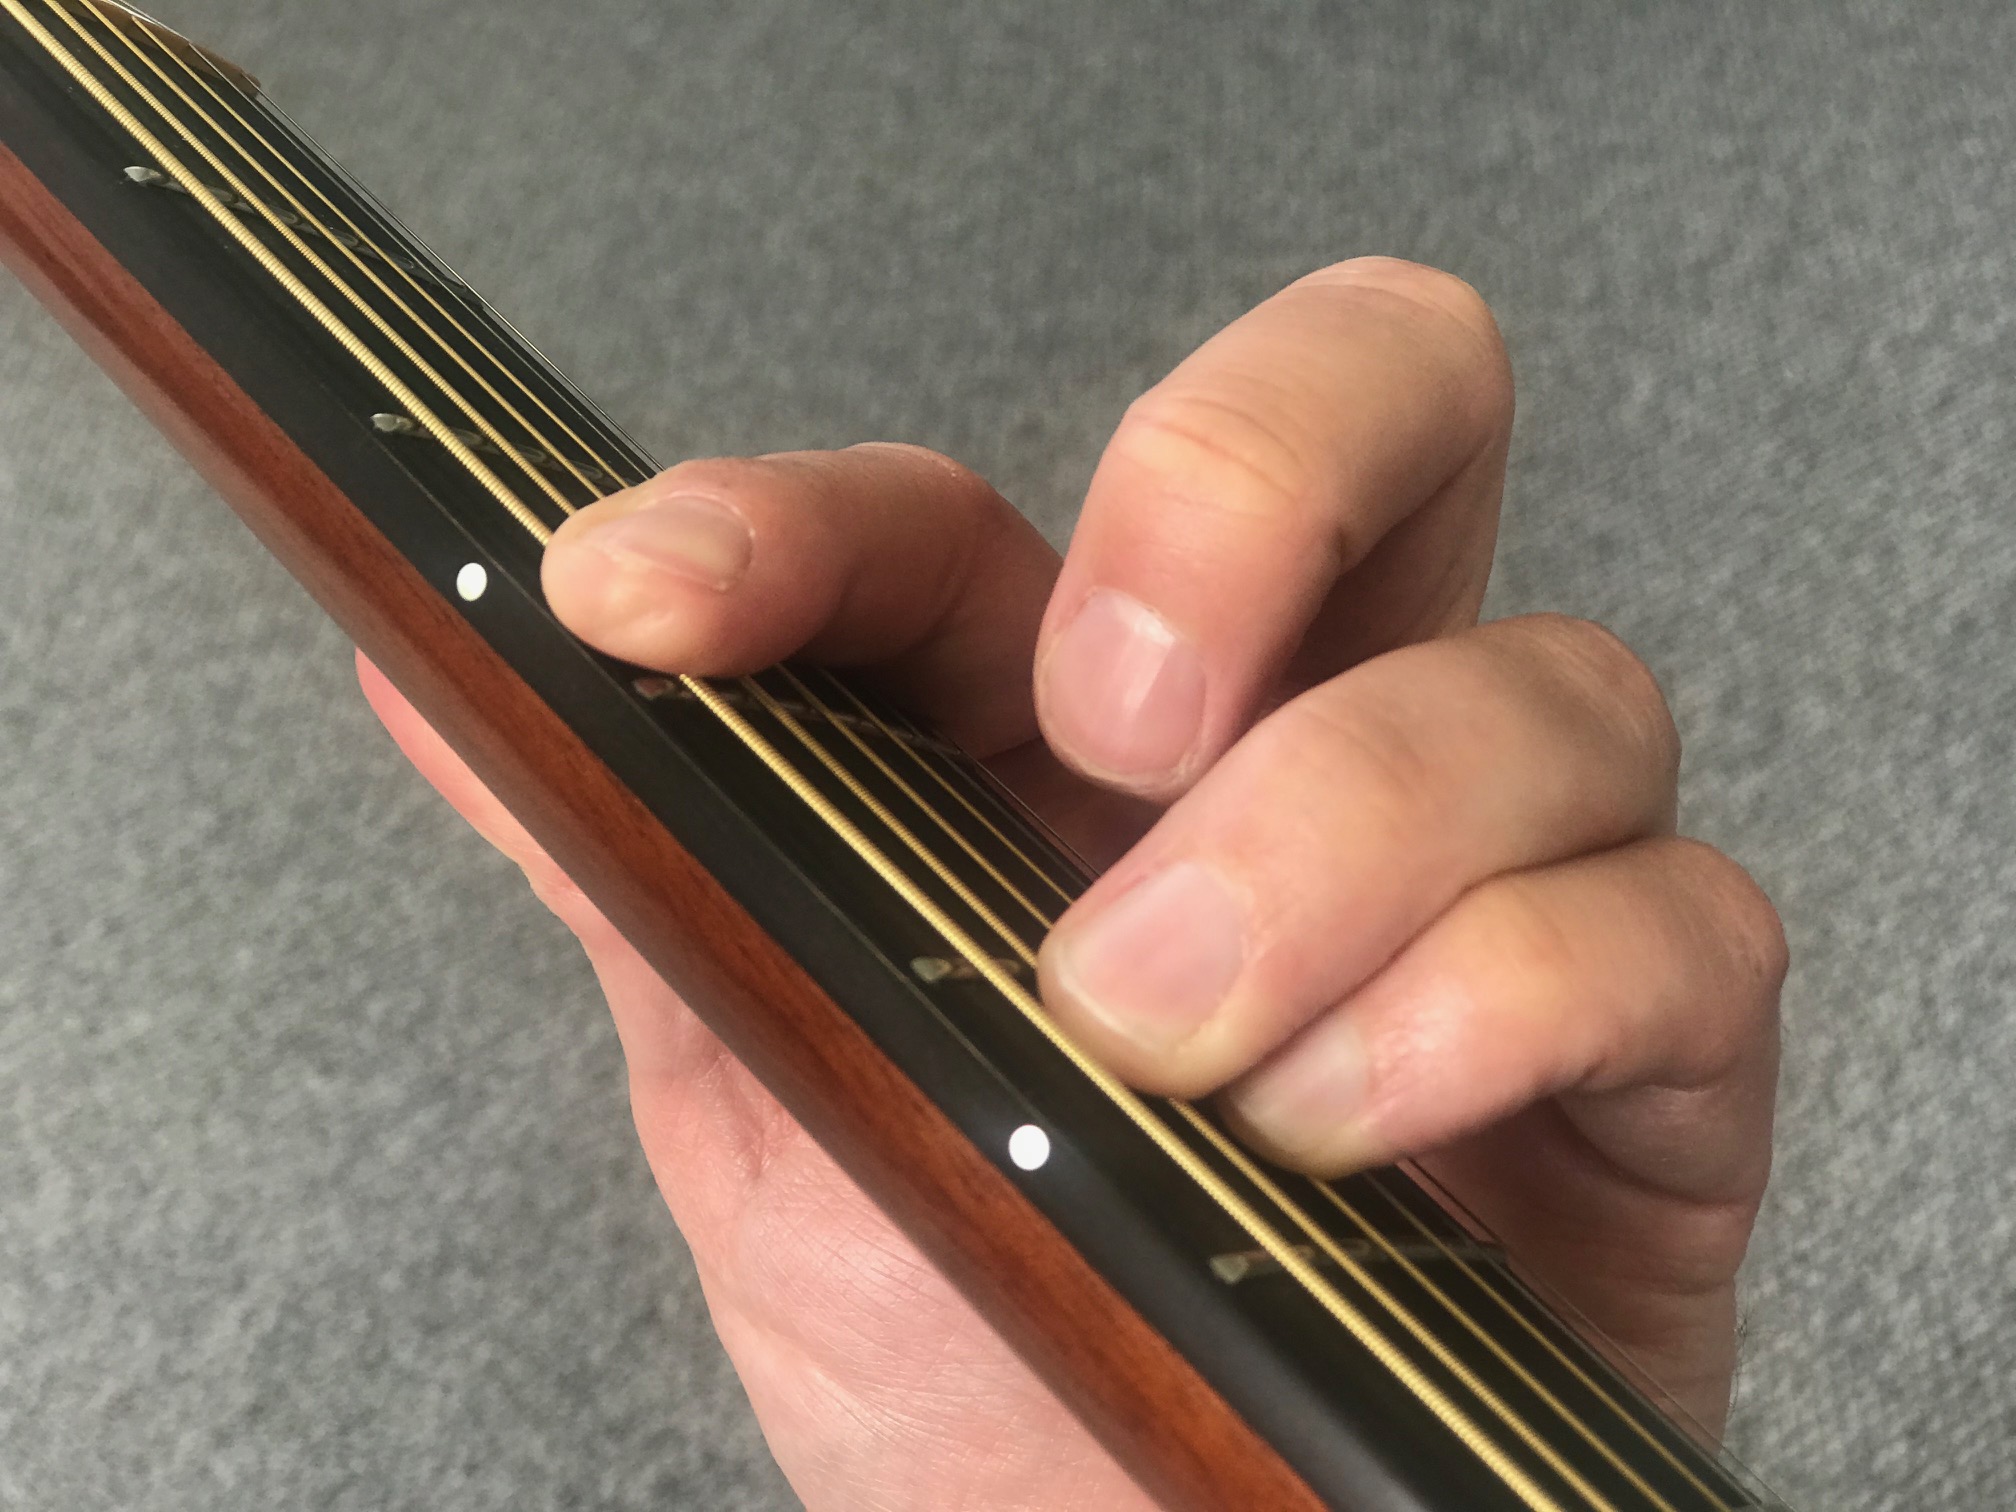 How To Play The Gm Chord On Acoustic Guitar